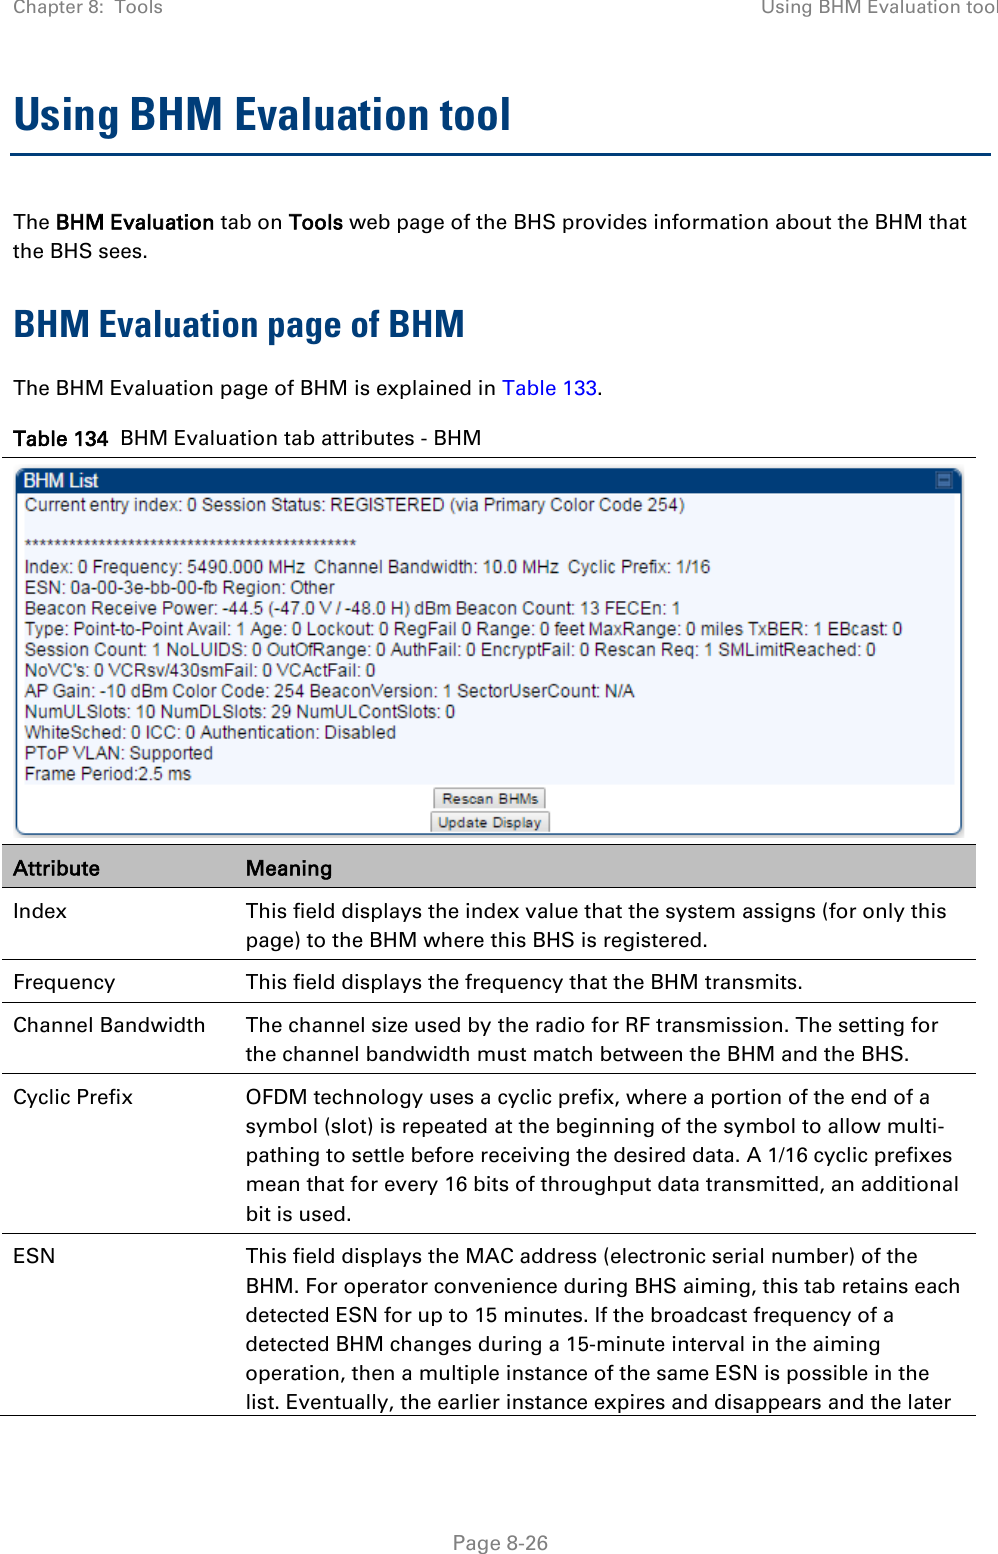 Chapter 8:  Tools Using BHM Evaluation tool   Page 8-26 Using BHM Evaluation tool The BHM Evaluation tab on Tools web page of the BHS provides information about the BHM that the BHS sees. BHM Evaluation page of BHM The BHM Evaluation page of BHM is explained in Table 133. Table 134  BHM Evaluation tab attributes - BHM  Attribute Meaning Index This field displays the index value that the system assigns (for only this page) to the BHM where this BHS is registered. Frequency This field displays the frequency that the BHM transmits. Channel Bandwidth The channel size used by the radio for RF transmission. The setting for the channel bandwidth must match between the BHM and the BHS.   Cyclic Prefix OFDM technology uses a cyclic prefix, where a portion of the end of a symbol (slot) is repeated at the beginning of the symbol to allow multi-pathing to settle before receiving the desired data. A 1/16 cyclic prefixes mean that for every 16 bits of throughput data transmitted, an additional bit is used. ESN This field displays the MAC address (electronic serial number) of the BHM. For operator convenience during BHS aiming, this tab retains each detected ESN for up to 15 minutes. If the broadcast frequency of a detected BHM changes during a 15-minute interval in the aiming operation, then a multiple instance of the same ESN is possible in the list. Eventually, the earlier instance expires and disappears and the later 